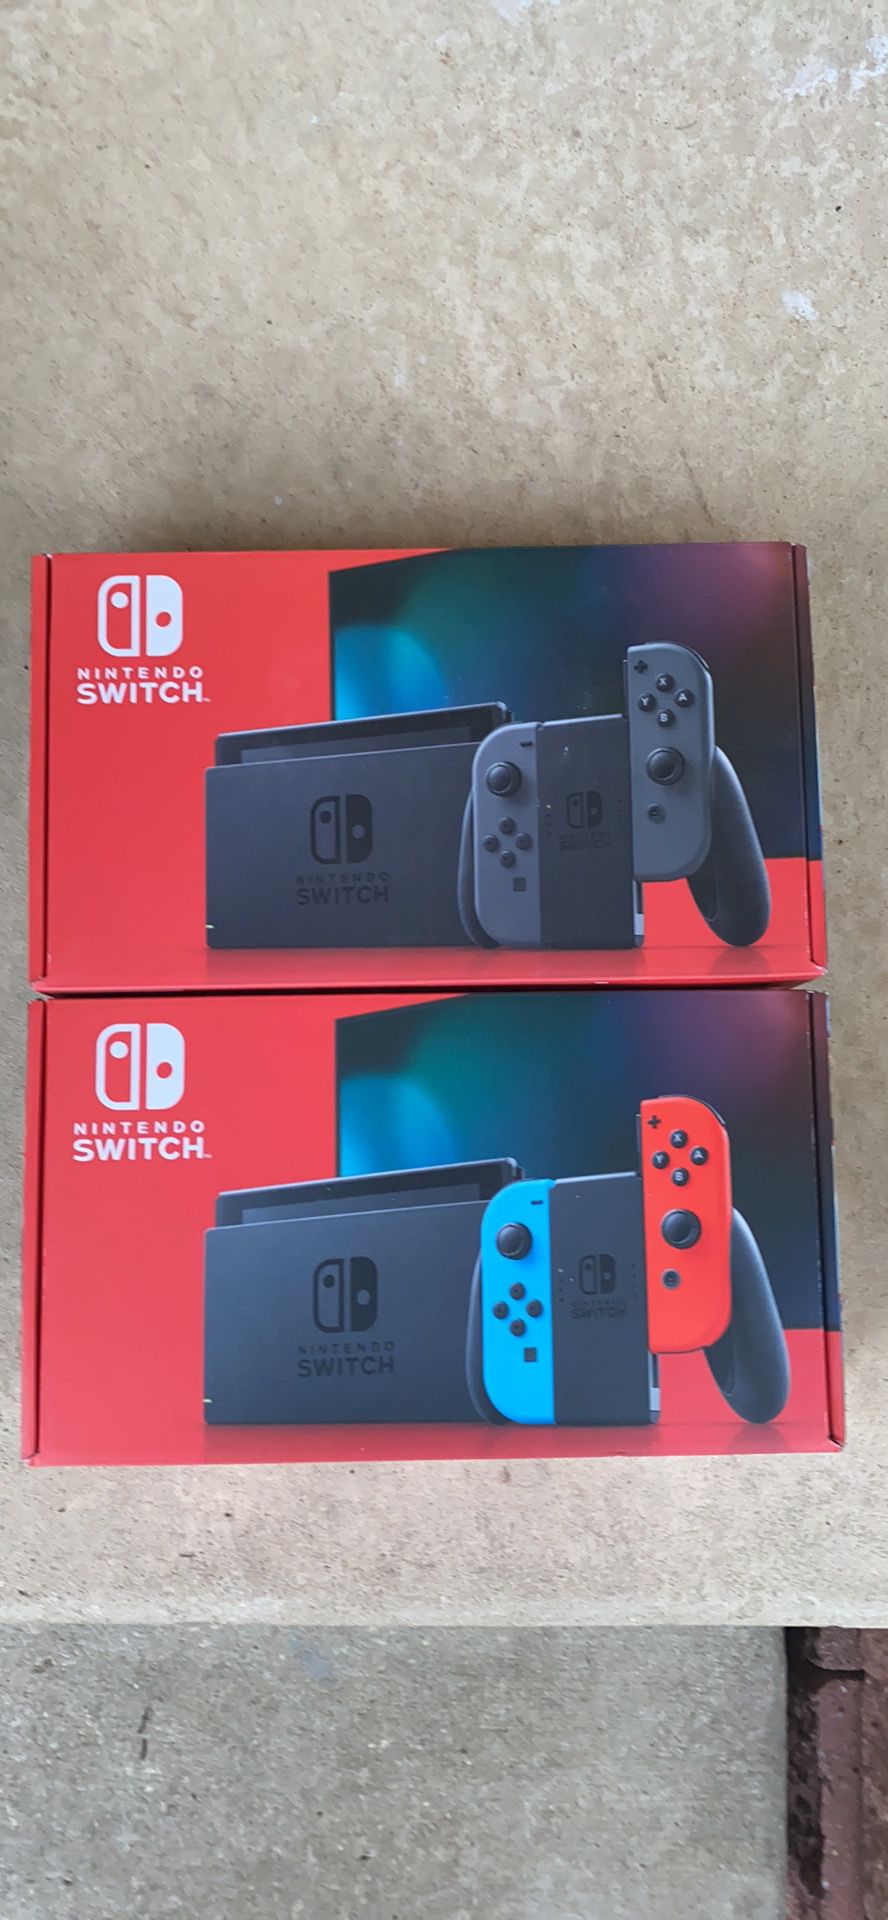 Brand new Nintendo switch both colors latest version